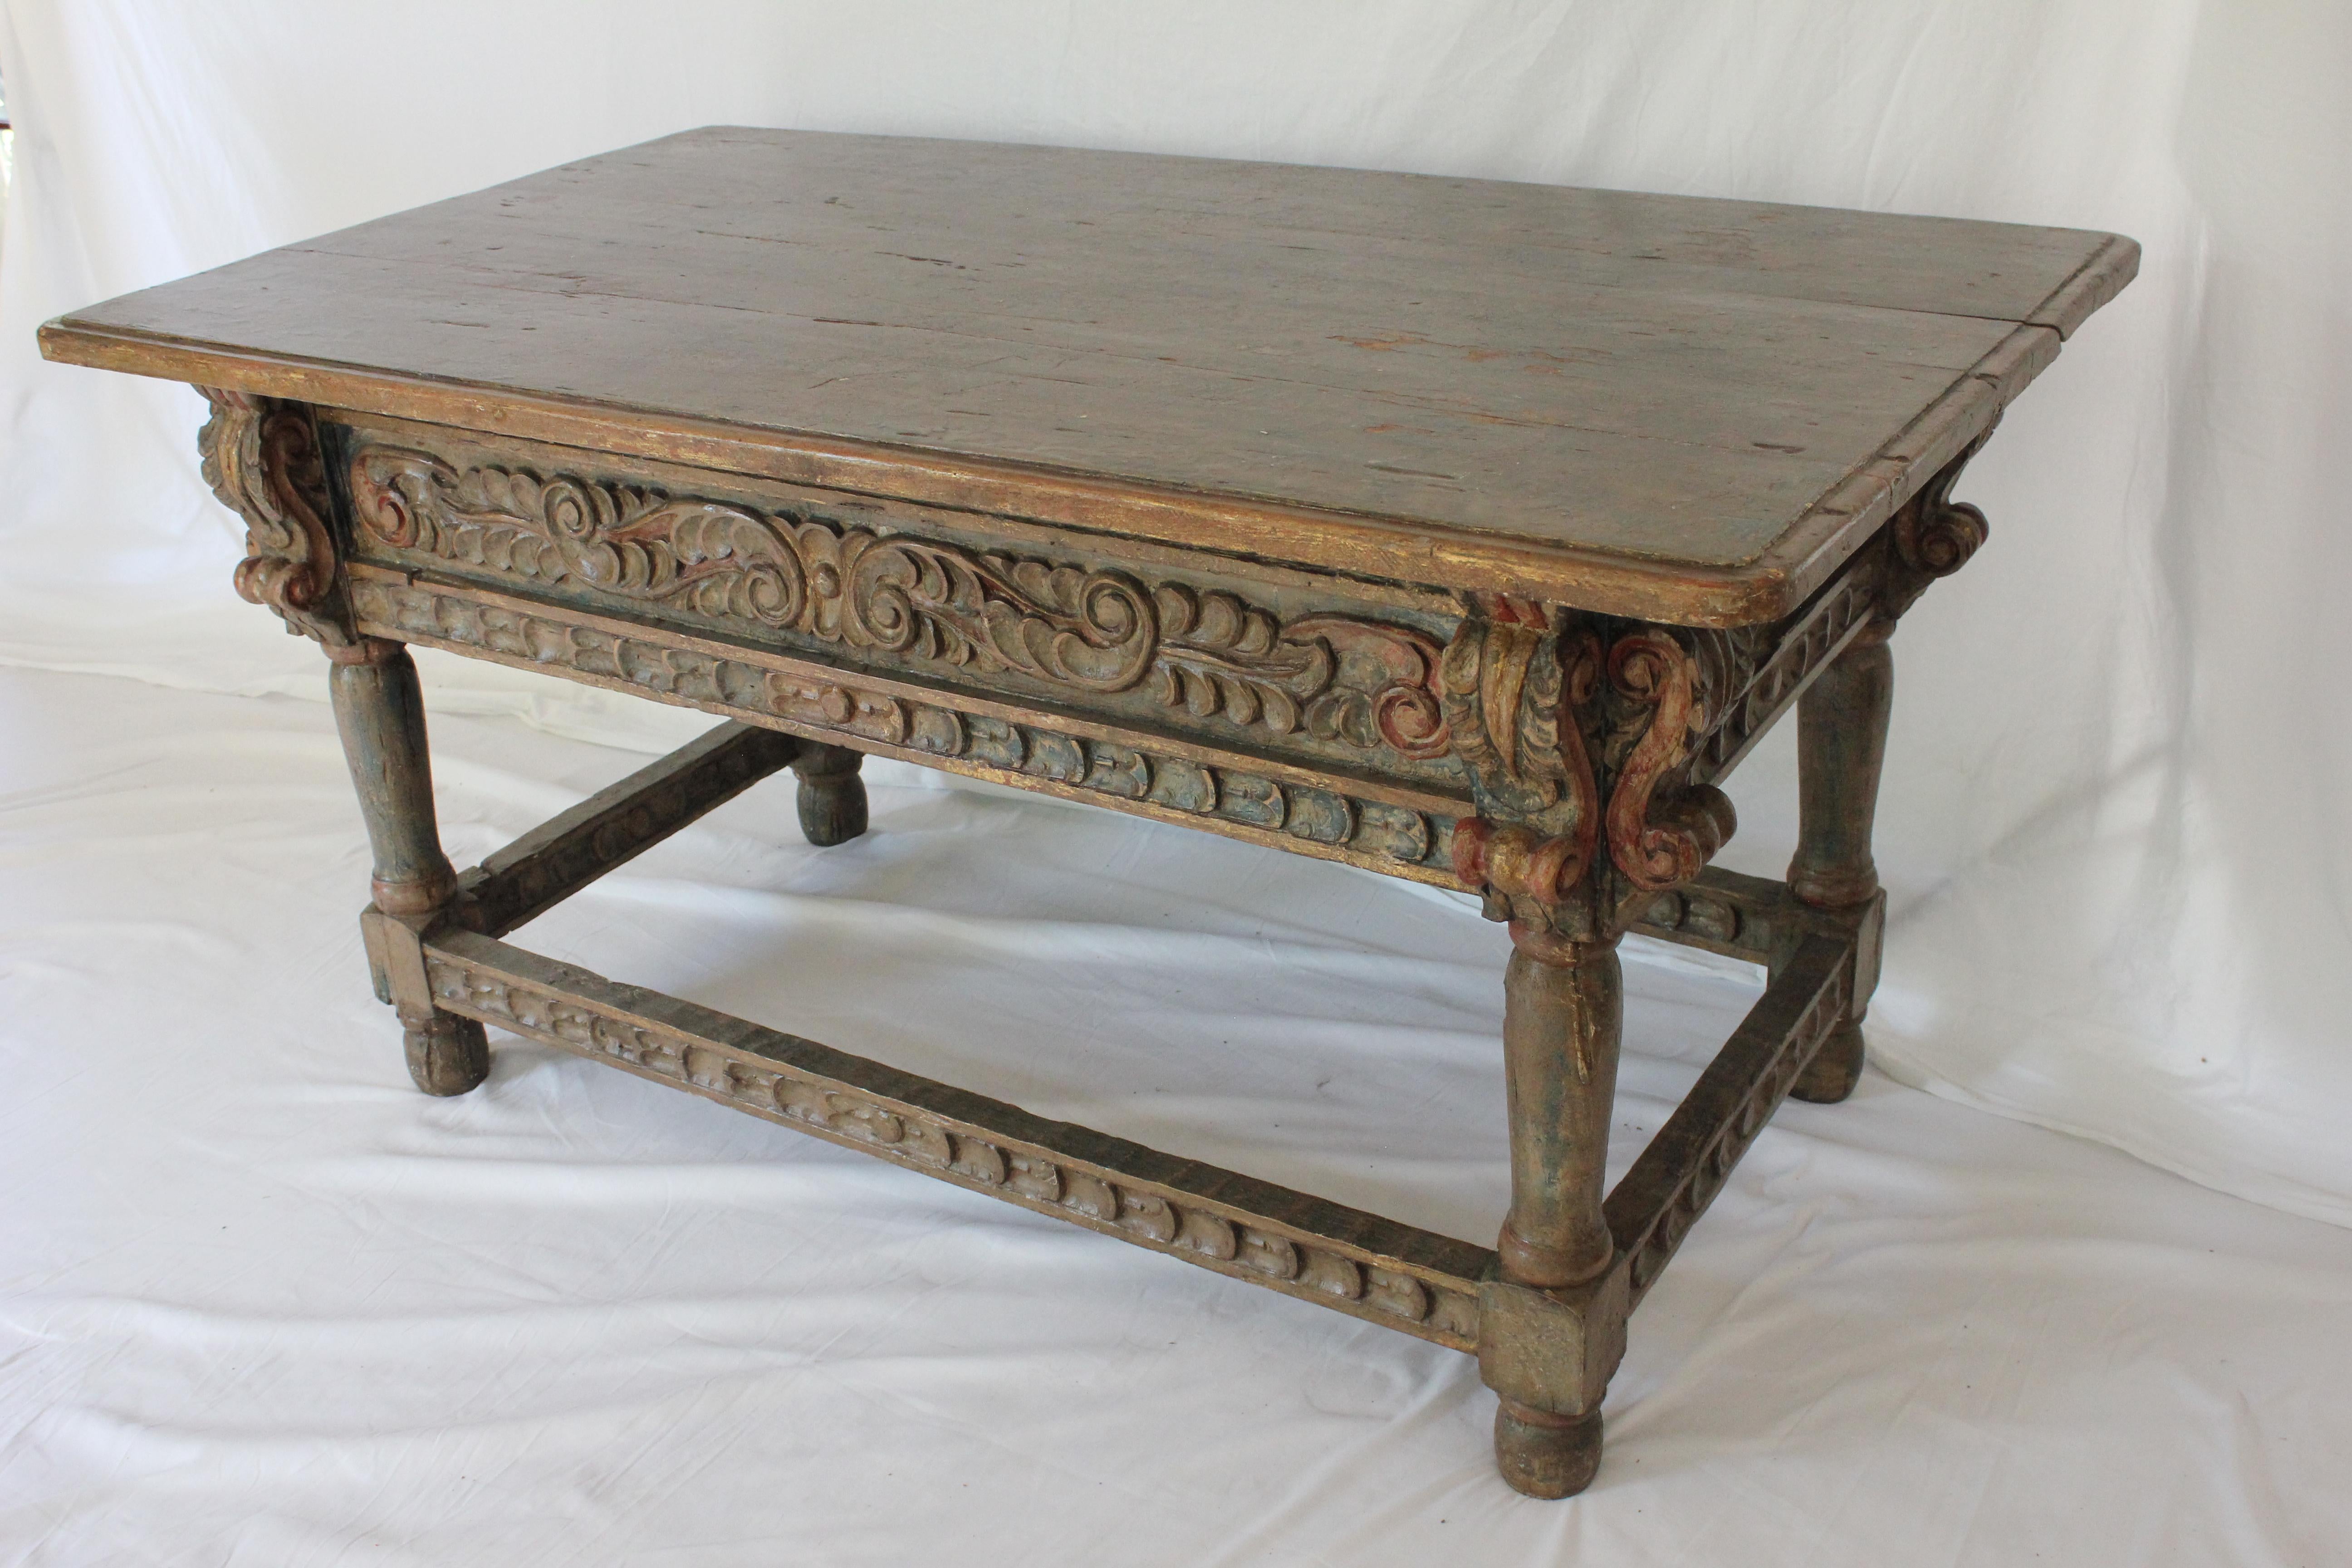 Polychrome Carved Spanish Baroque / Colonial Oak Refectory Table Circa 1750 For Sale 3